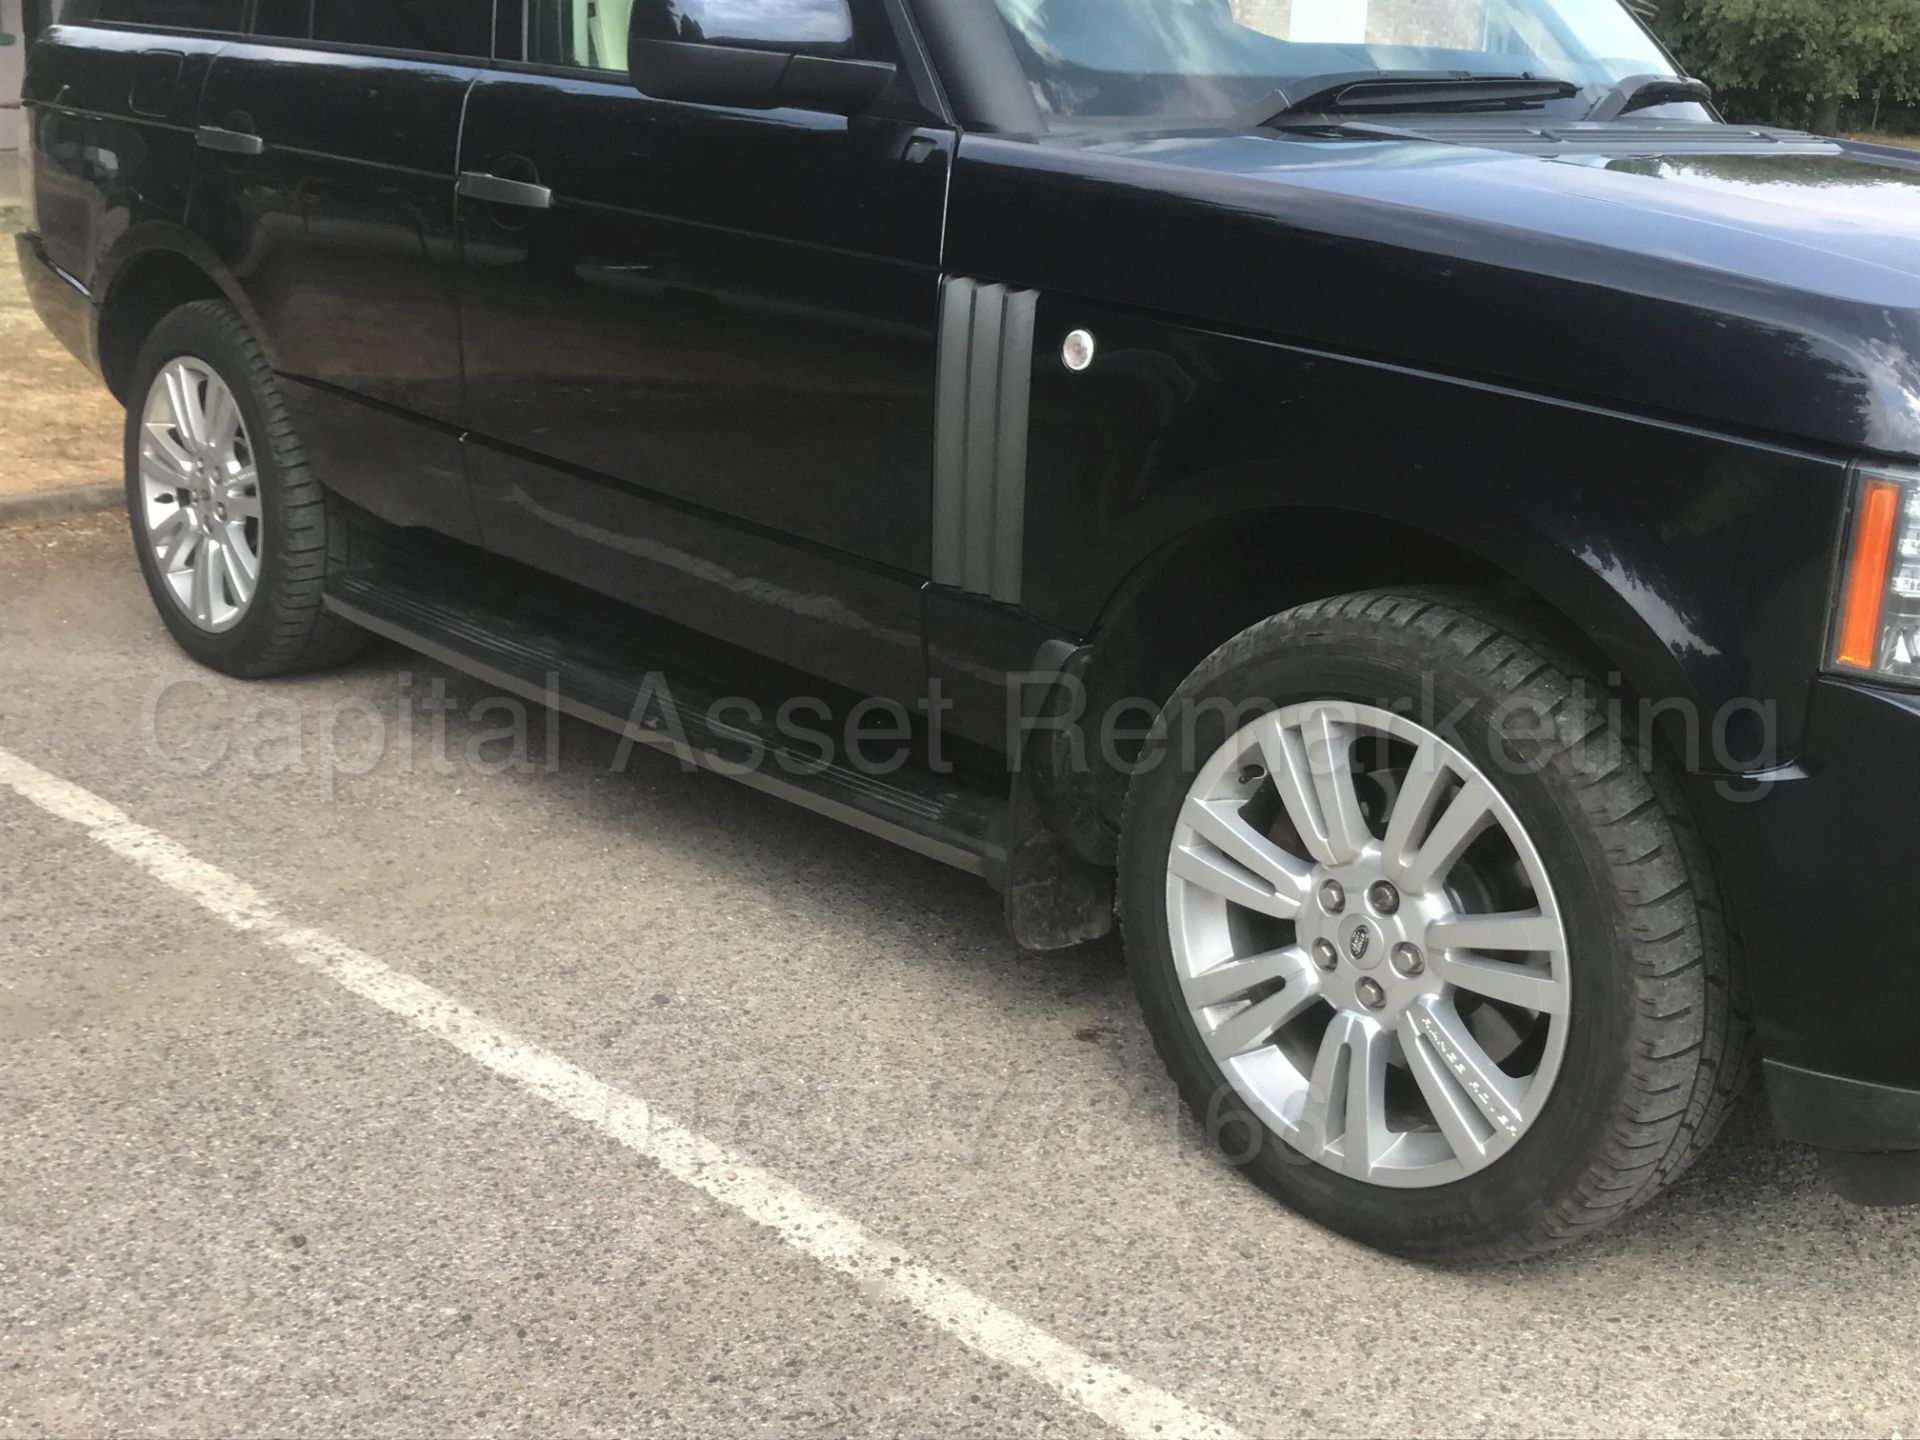 (On Sale) RANGE ROVER VOGUE **SE EDITION** (2010 - FACELIFT EDITION) 'TDV8 - 268 BHP - AUTO' **WOW** - Image 17 of 62